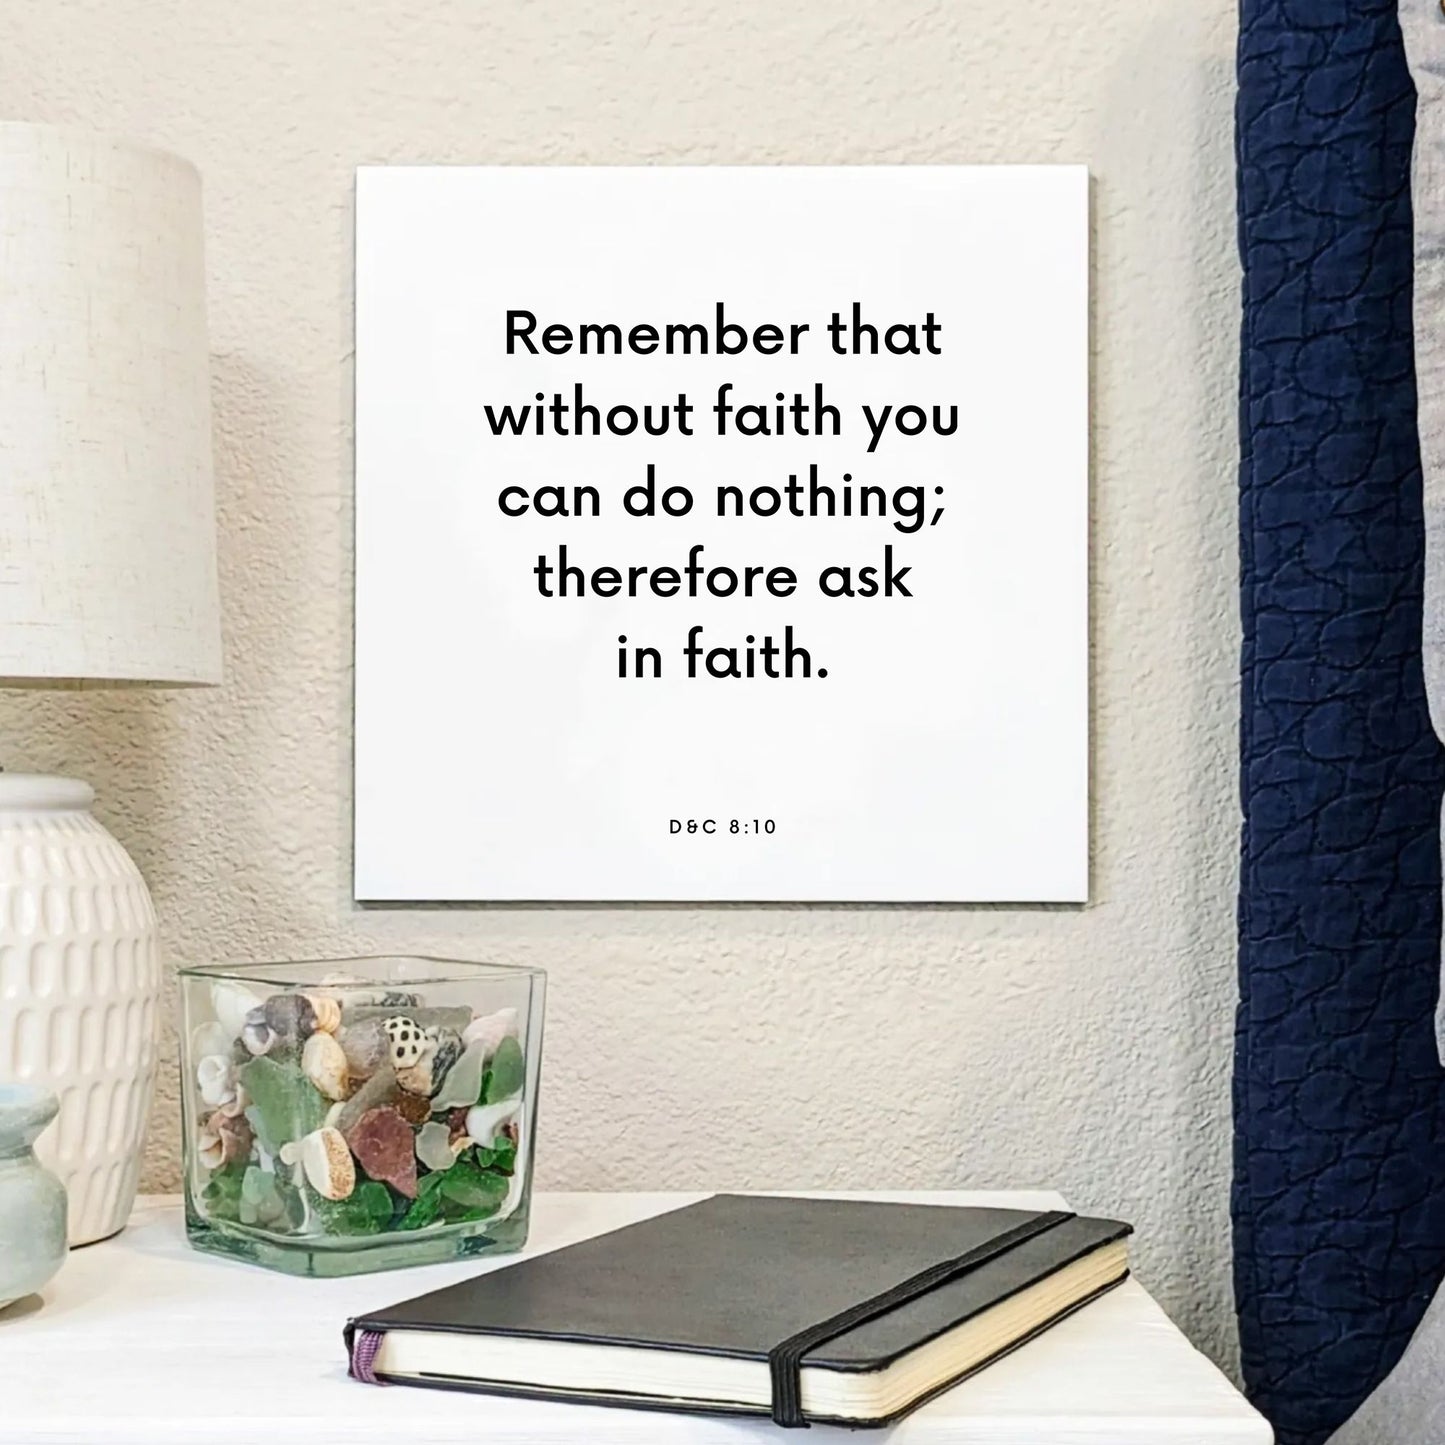 Bedside mouting of the scripture tile for D&C 8:10 - "Remember that without faith you can do nothing"